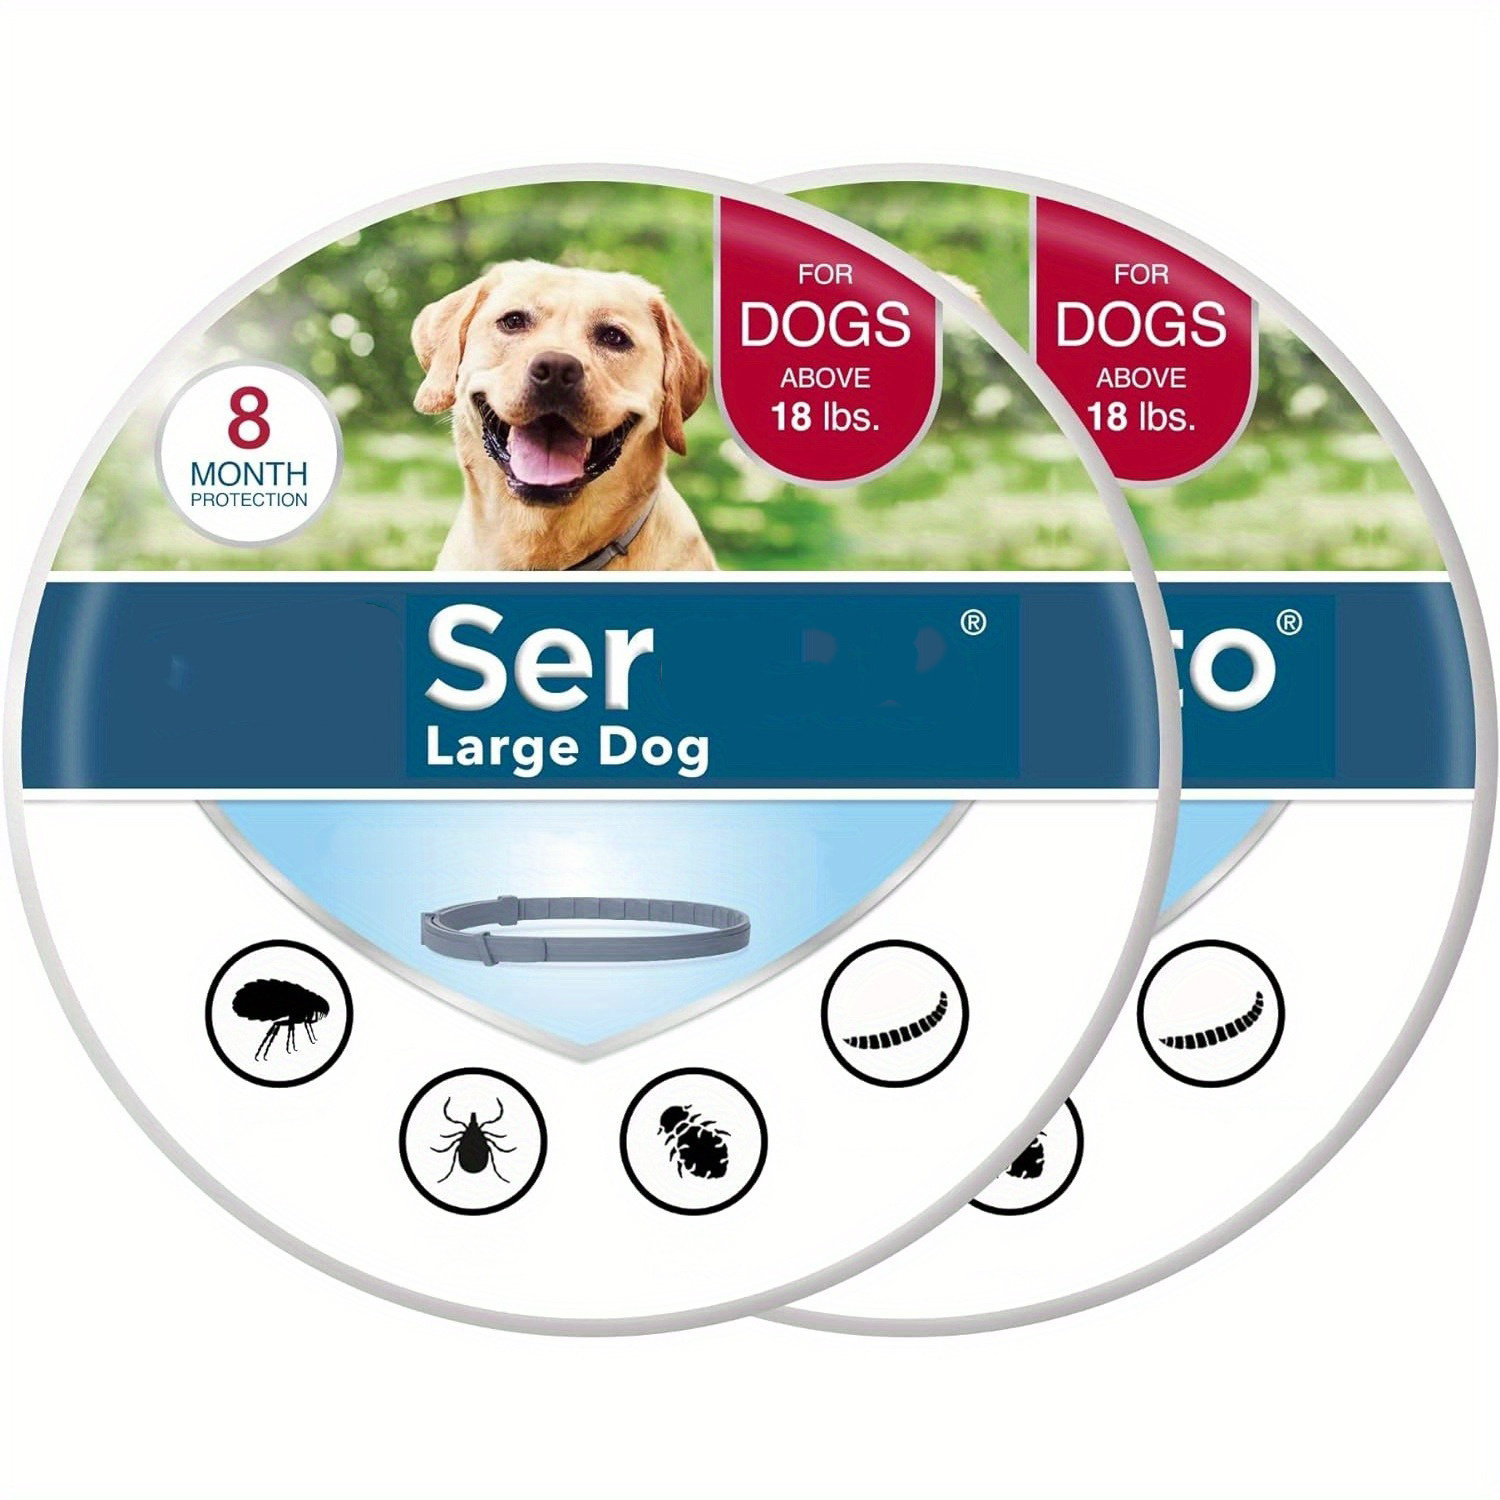 

2pcs Specific Collar For Dogs - Waterproof - Adjustable - Gray -8 Months Protection - Plant Ingredients